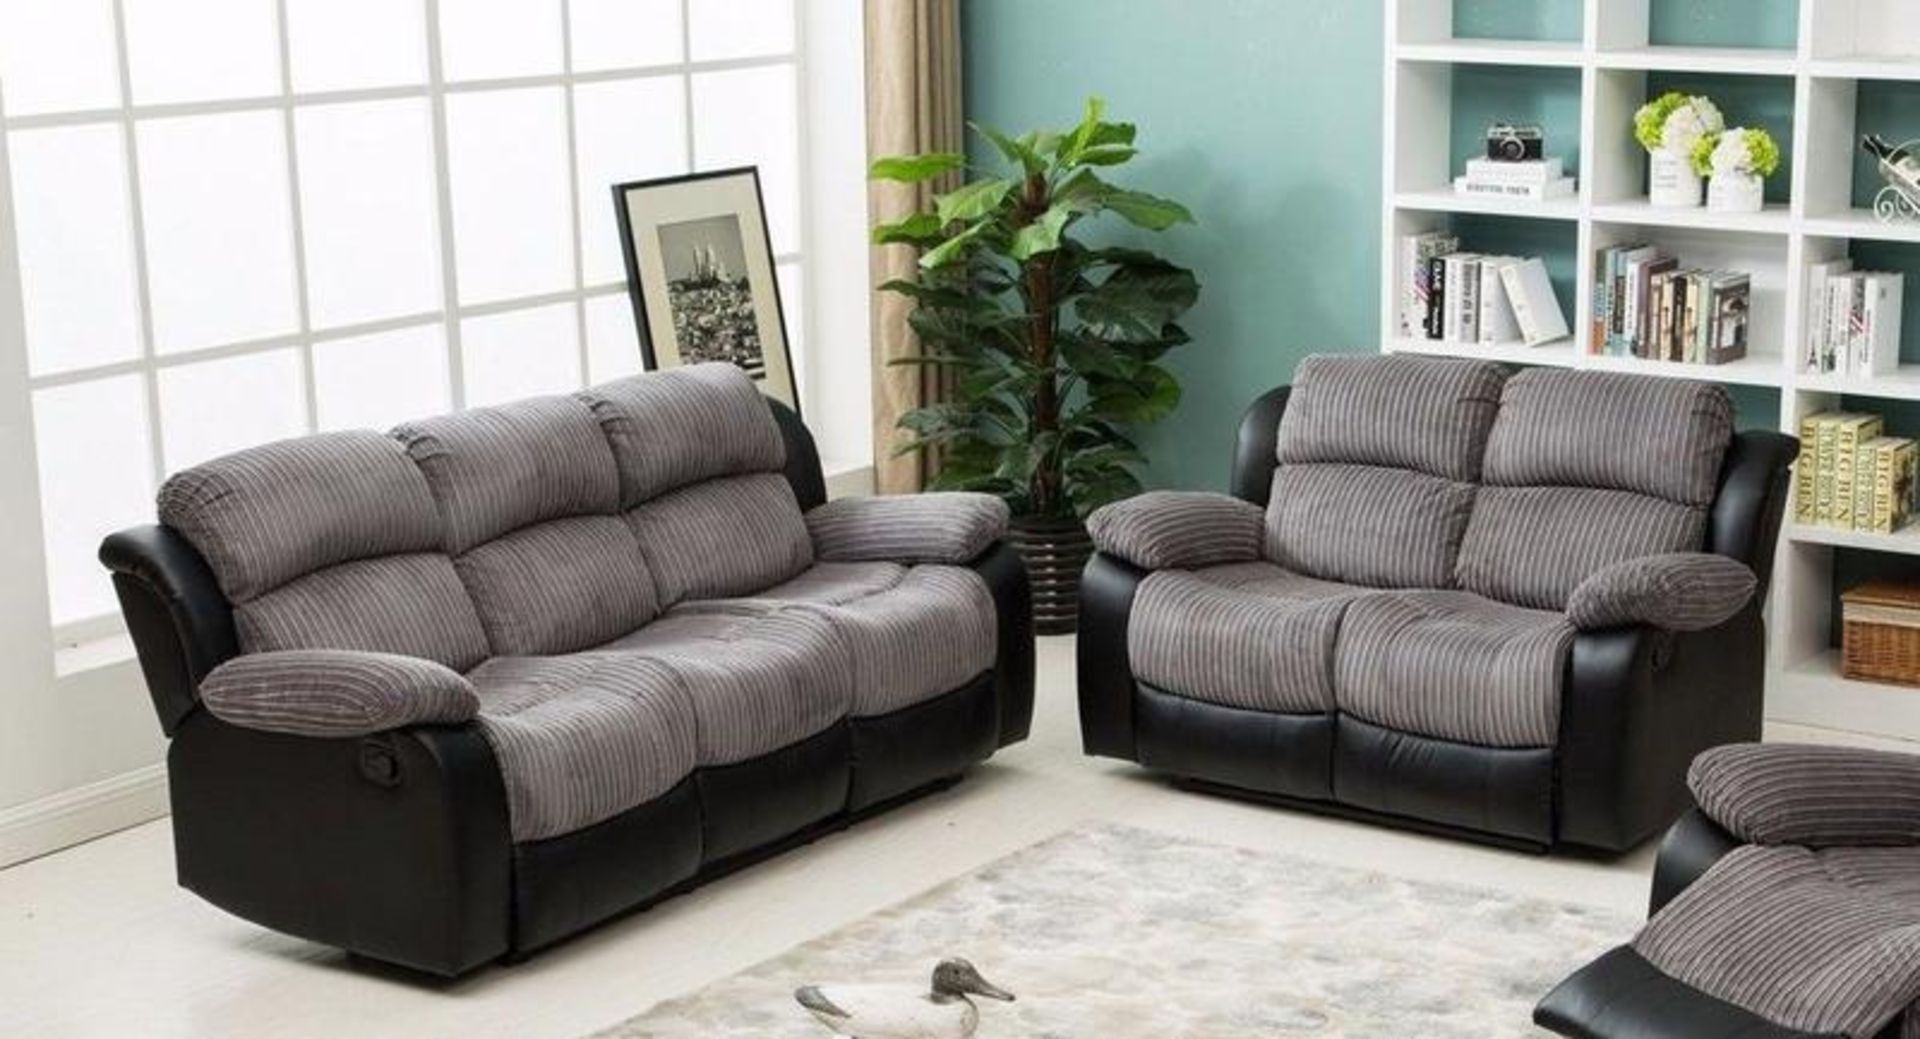 Brand New Boxed 3 Seater Plus 2 Seater California Sofas In Black/Grey